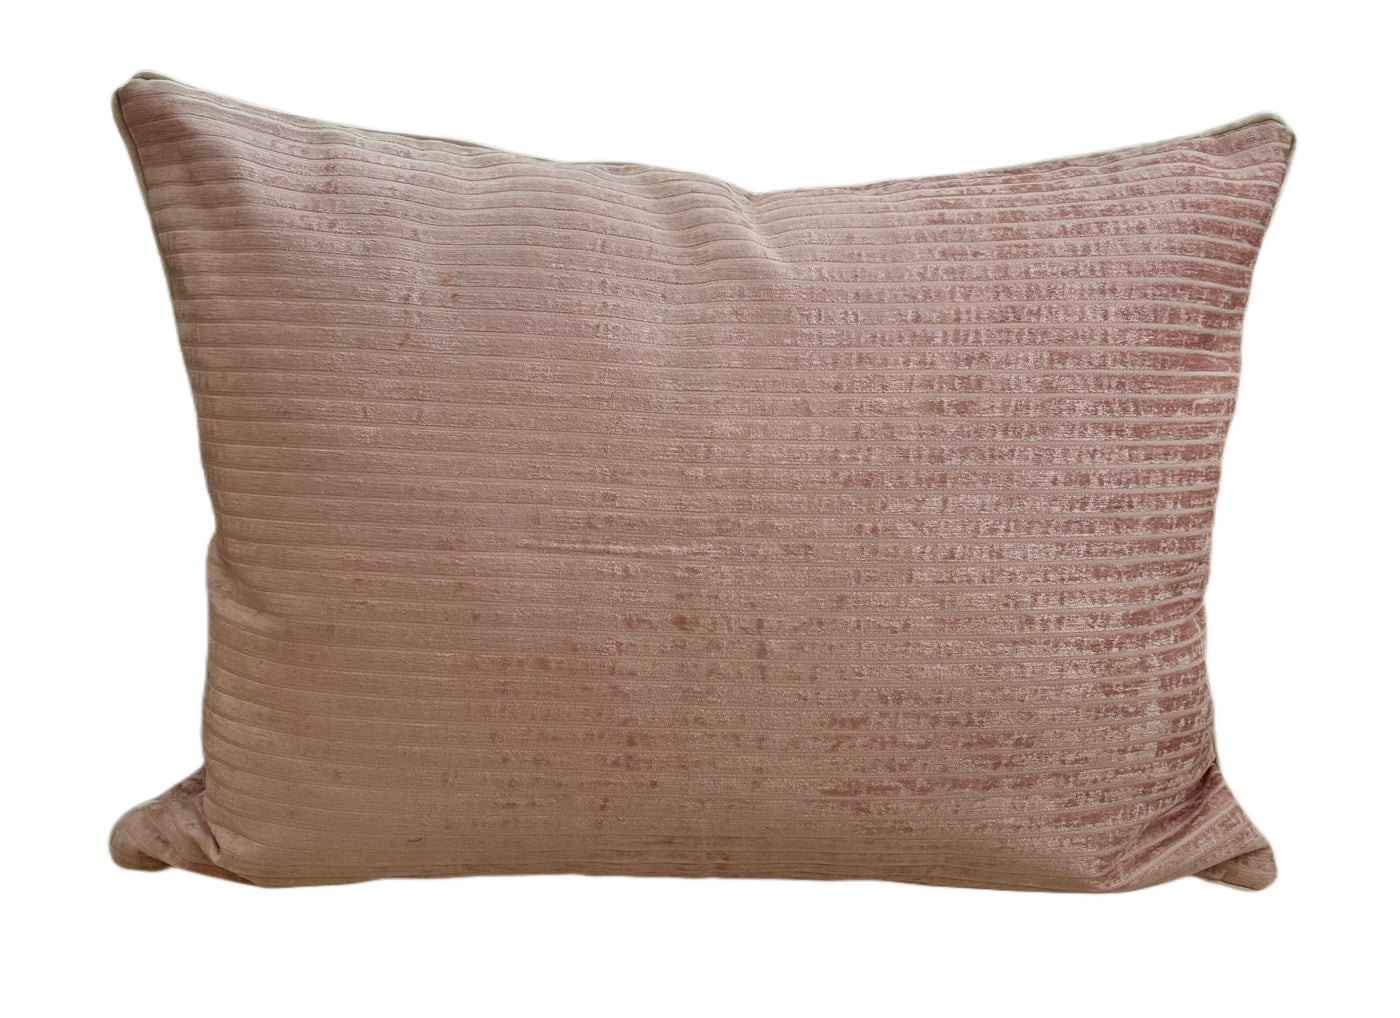 Pink or Gray Chenille Pillow